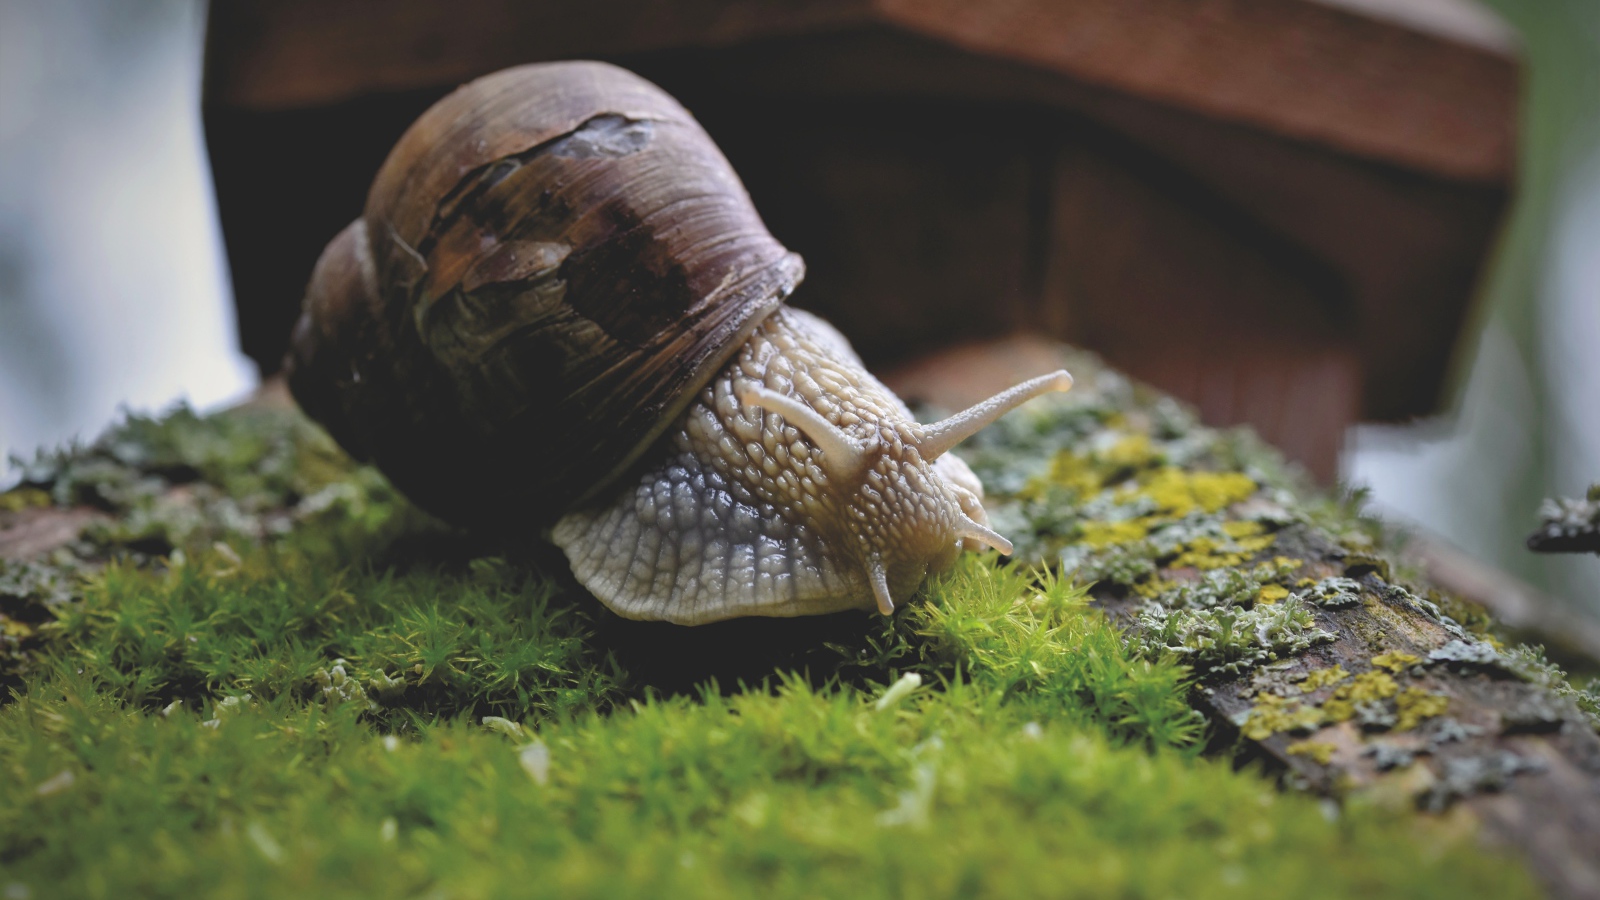 Large snail on a moss-covered stone